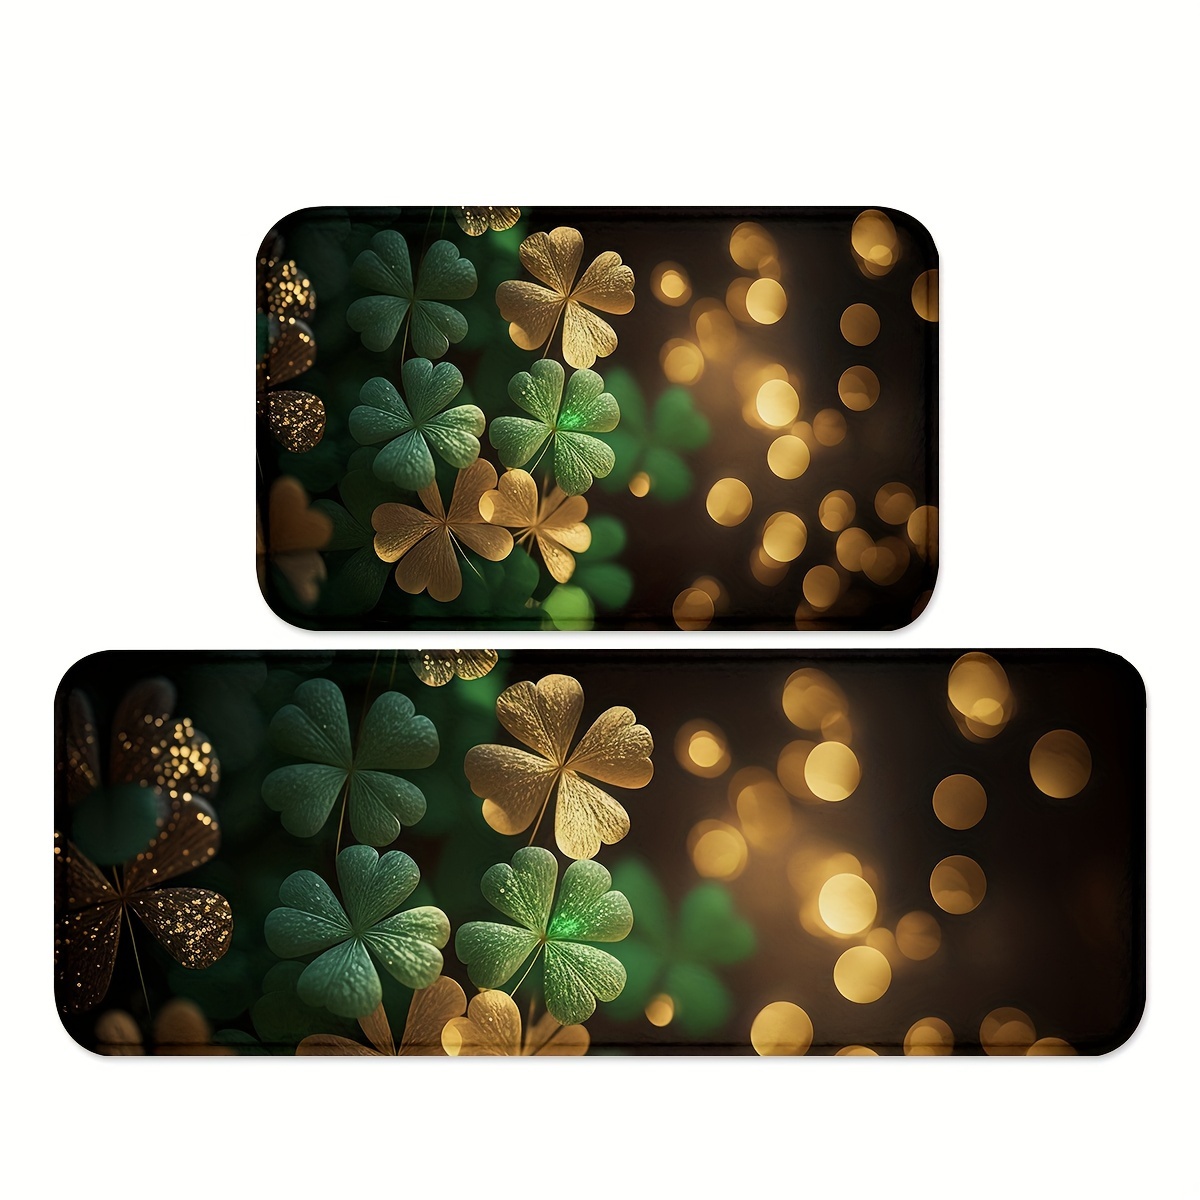 

1/2pcs Golden Shamrock Print Kitchen Mats, St. Patrick's Day Themed Foyer Rugs, Anti-fading Throw Cushions, Carpets For Home Office Sink Spring Decor High Traffic Area Indoors Outdoors